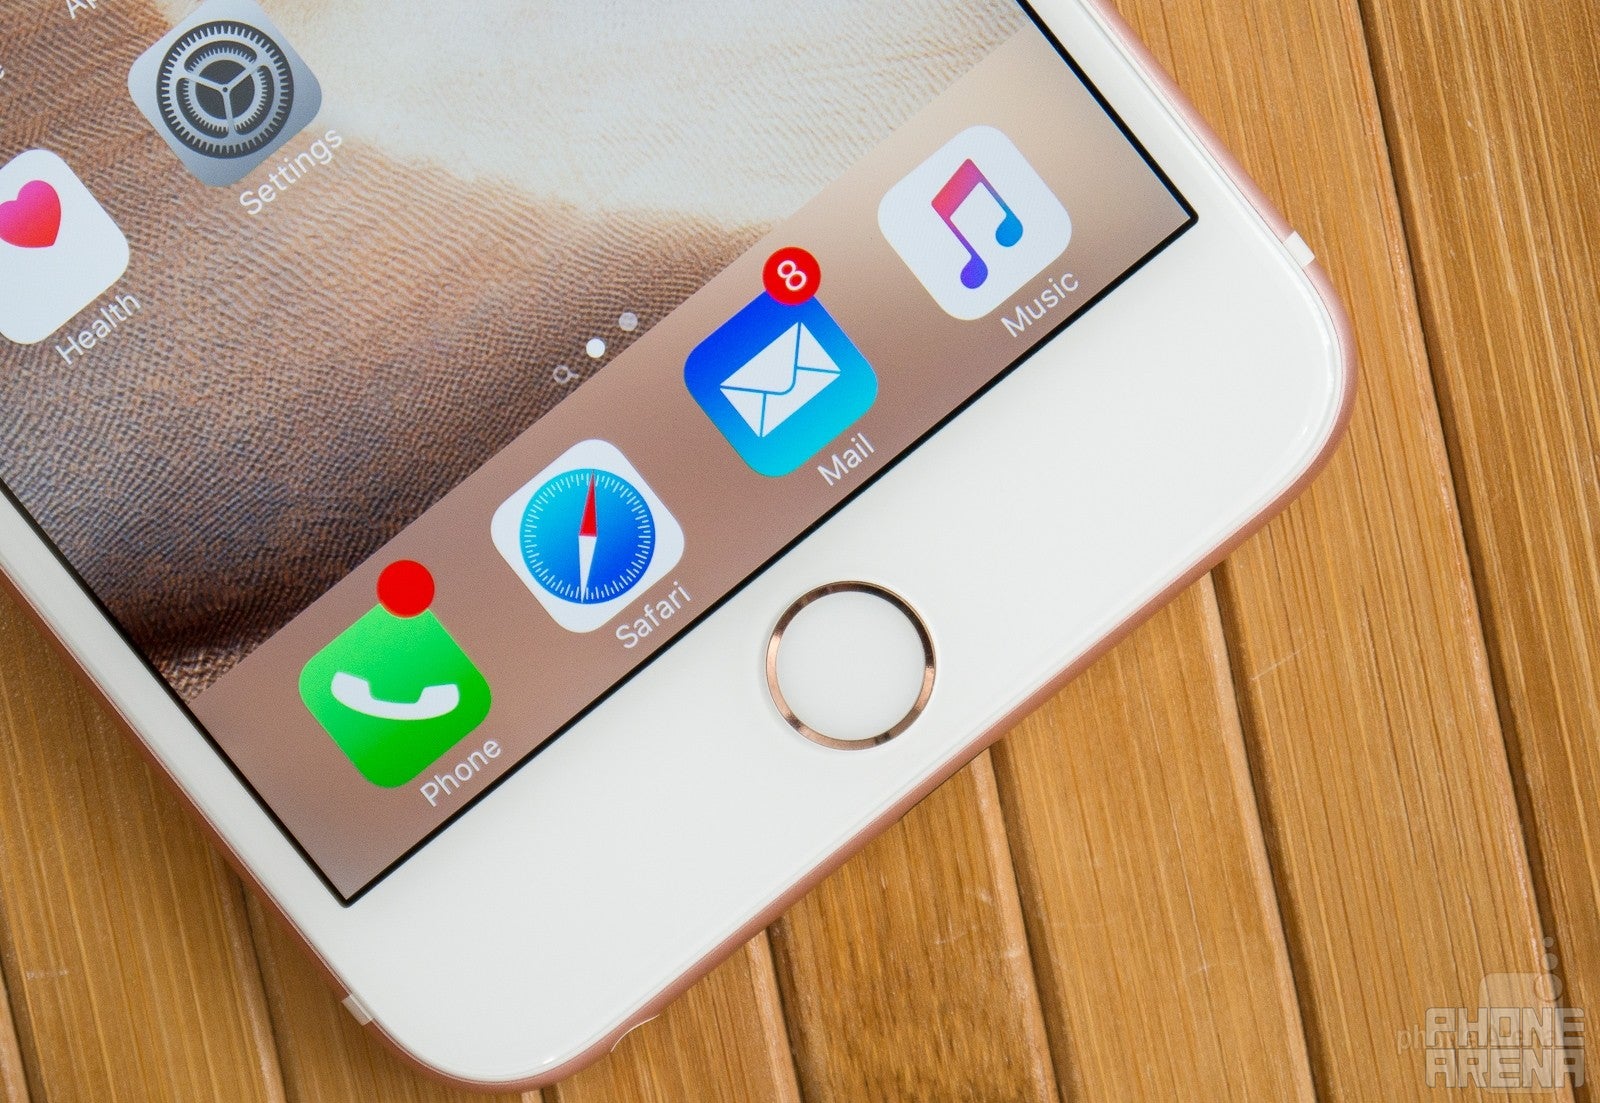 Apple reportedly wants to ship 100 million iPhone 7 devices by the end of 2016